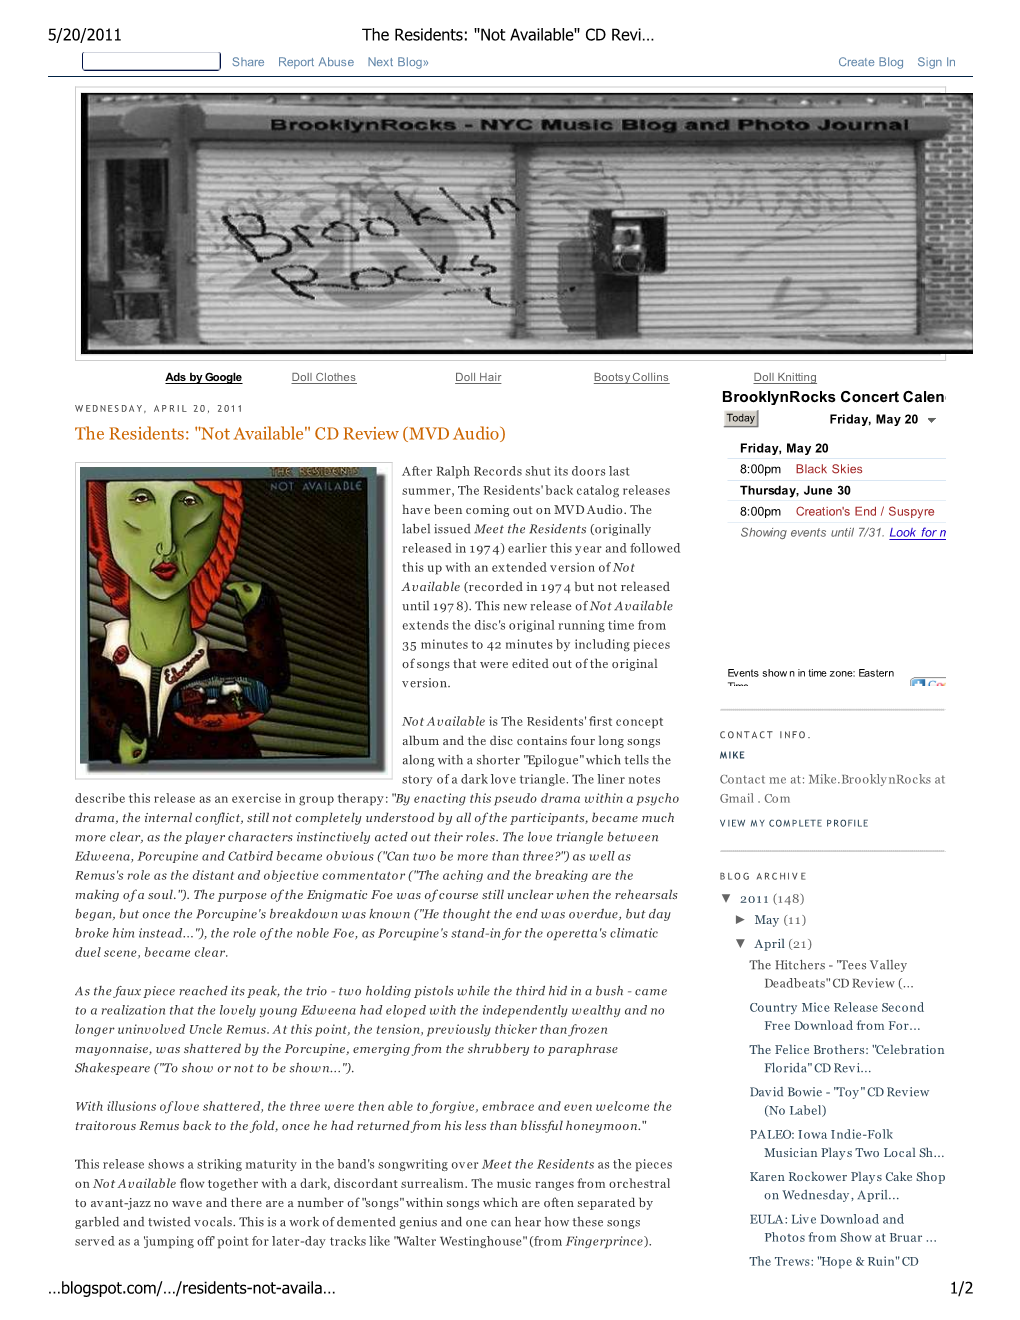 The Residents: "Not Available" CD Review (MVD Audio